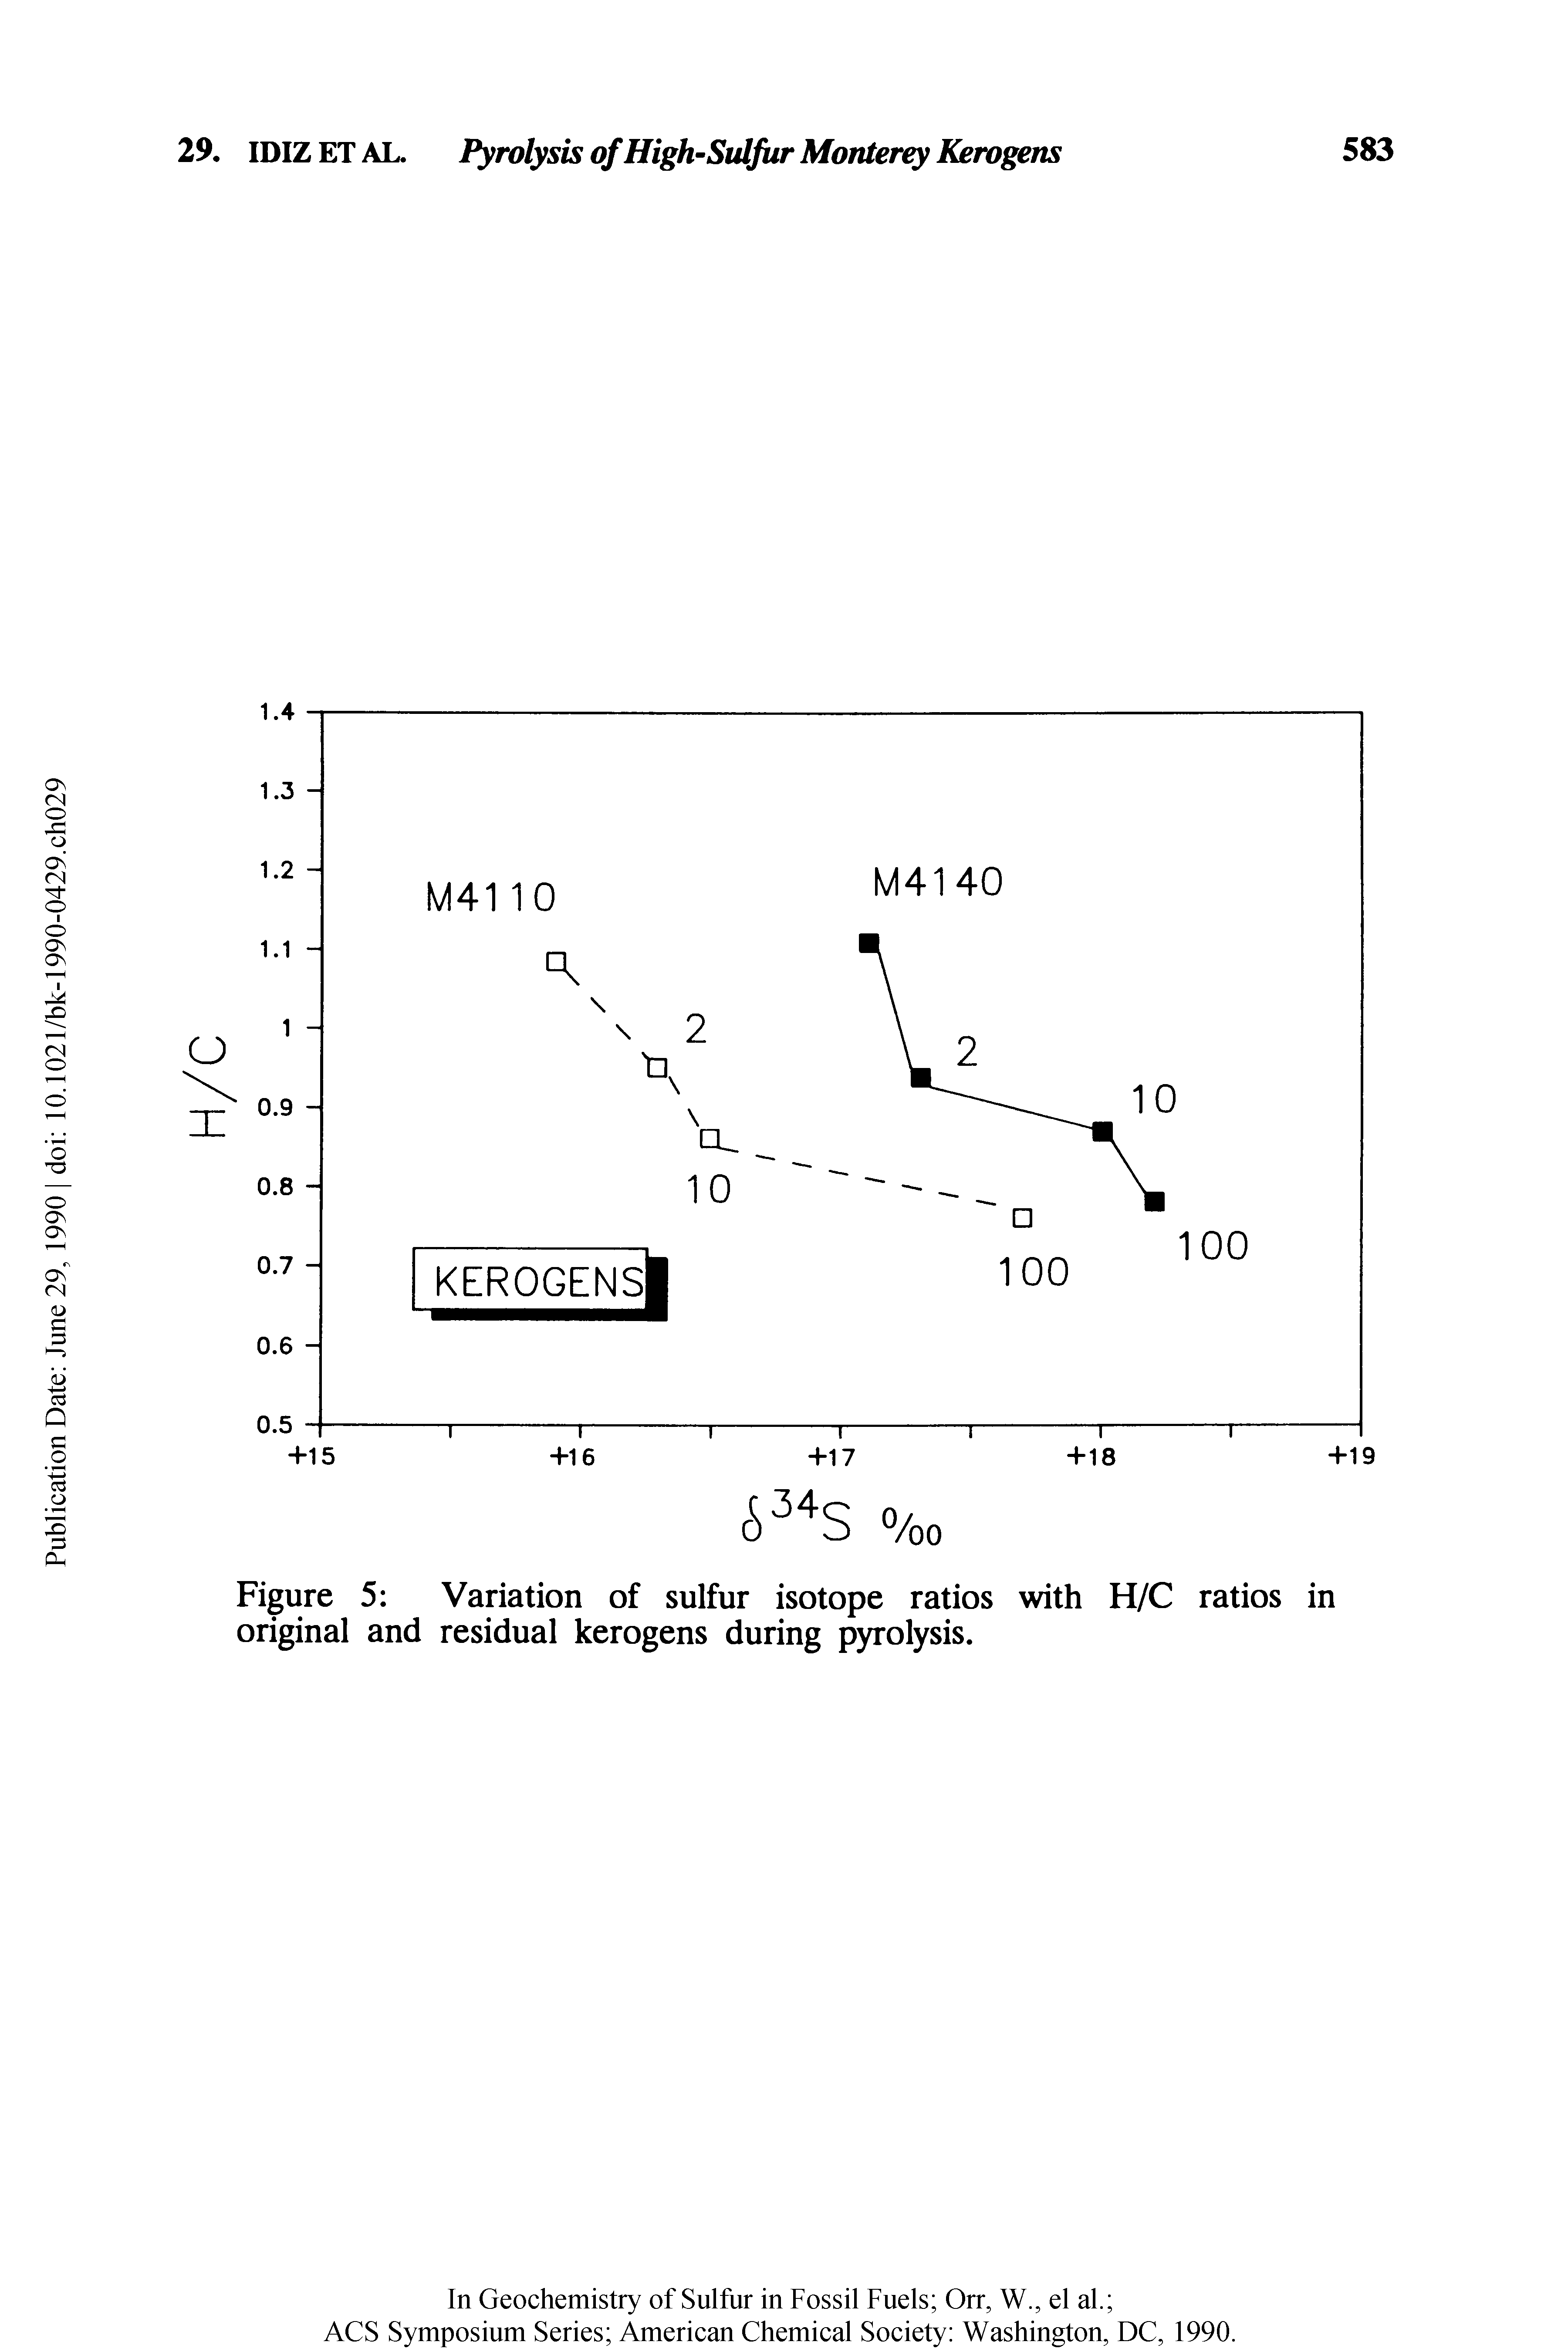 Figure 5 Variation of sulfur isotope ratios with H/C ratios in original and residual kerogens during pyrolysis.